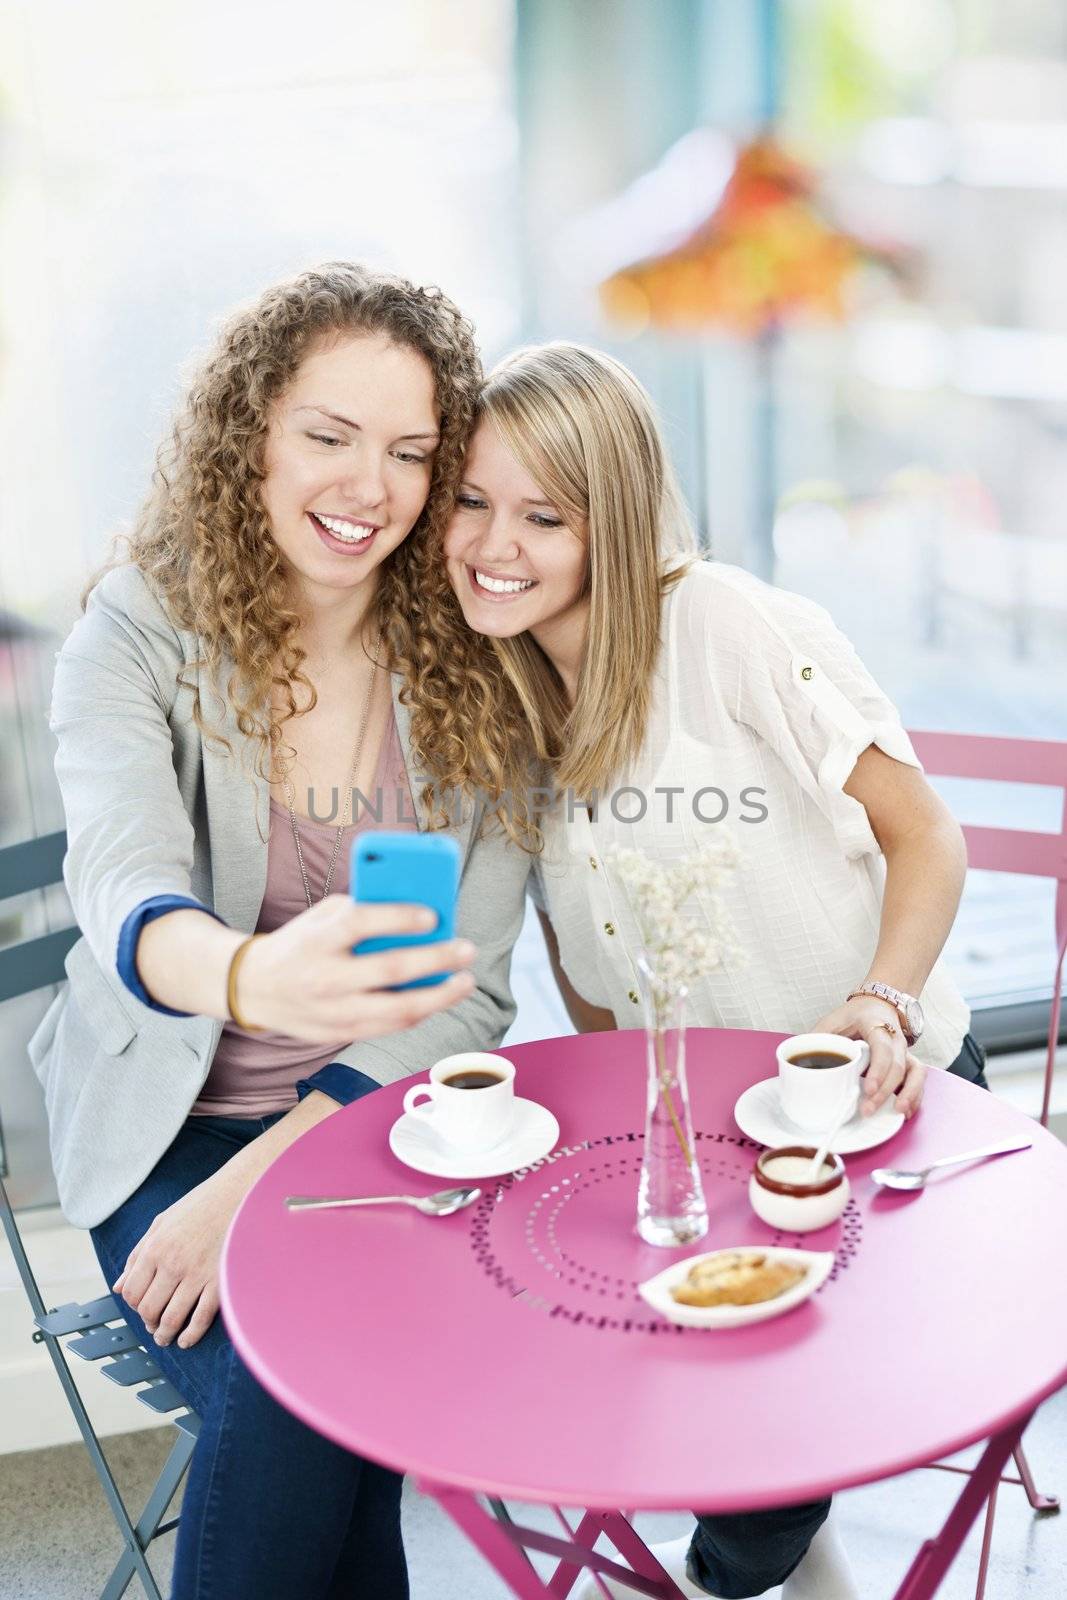 Two smiling women looking at smart phone in cafe